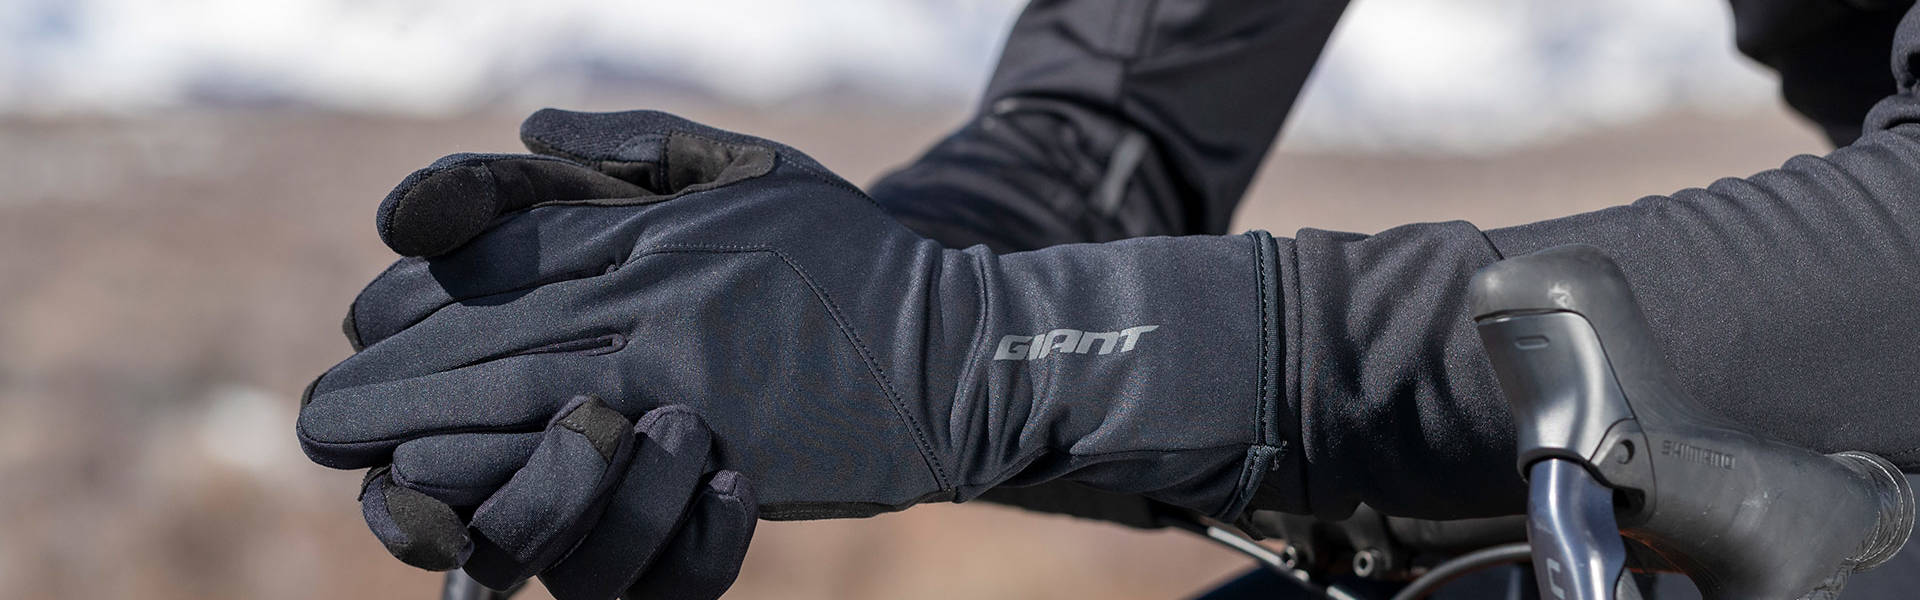 Gloves Giant Bicycles US